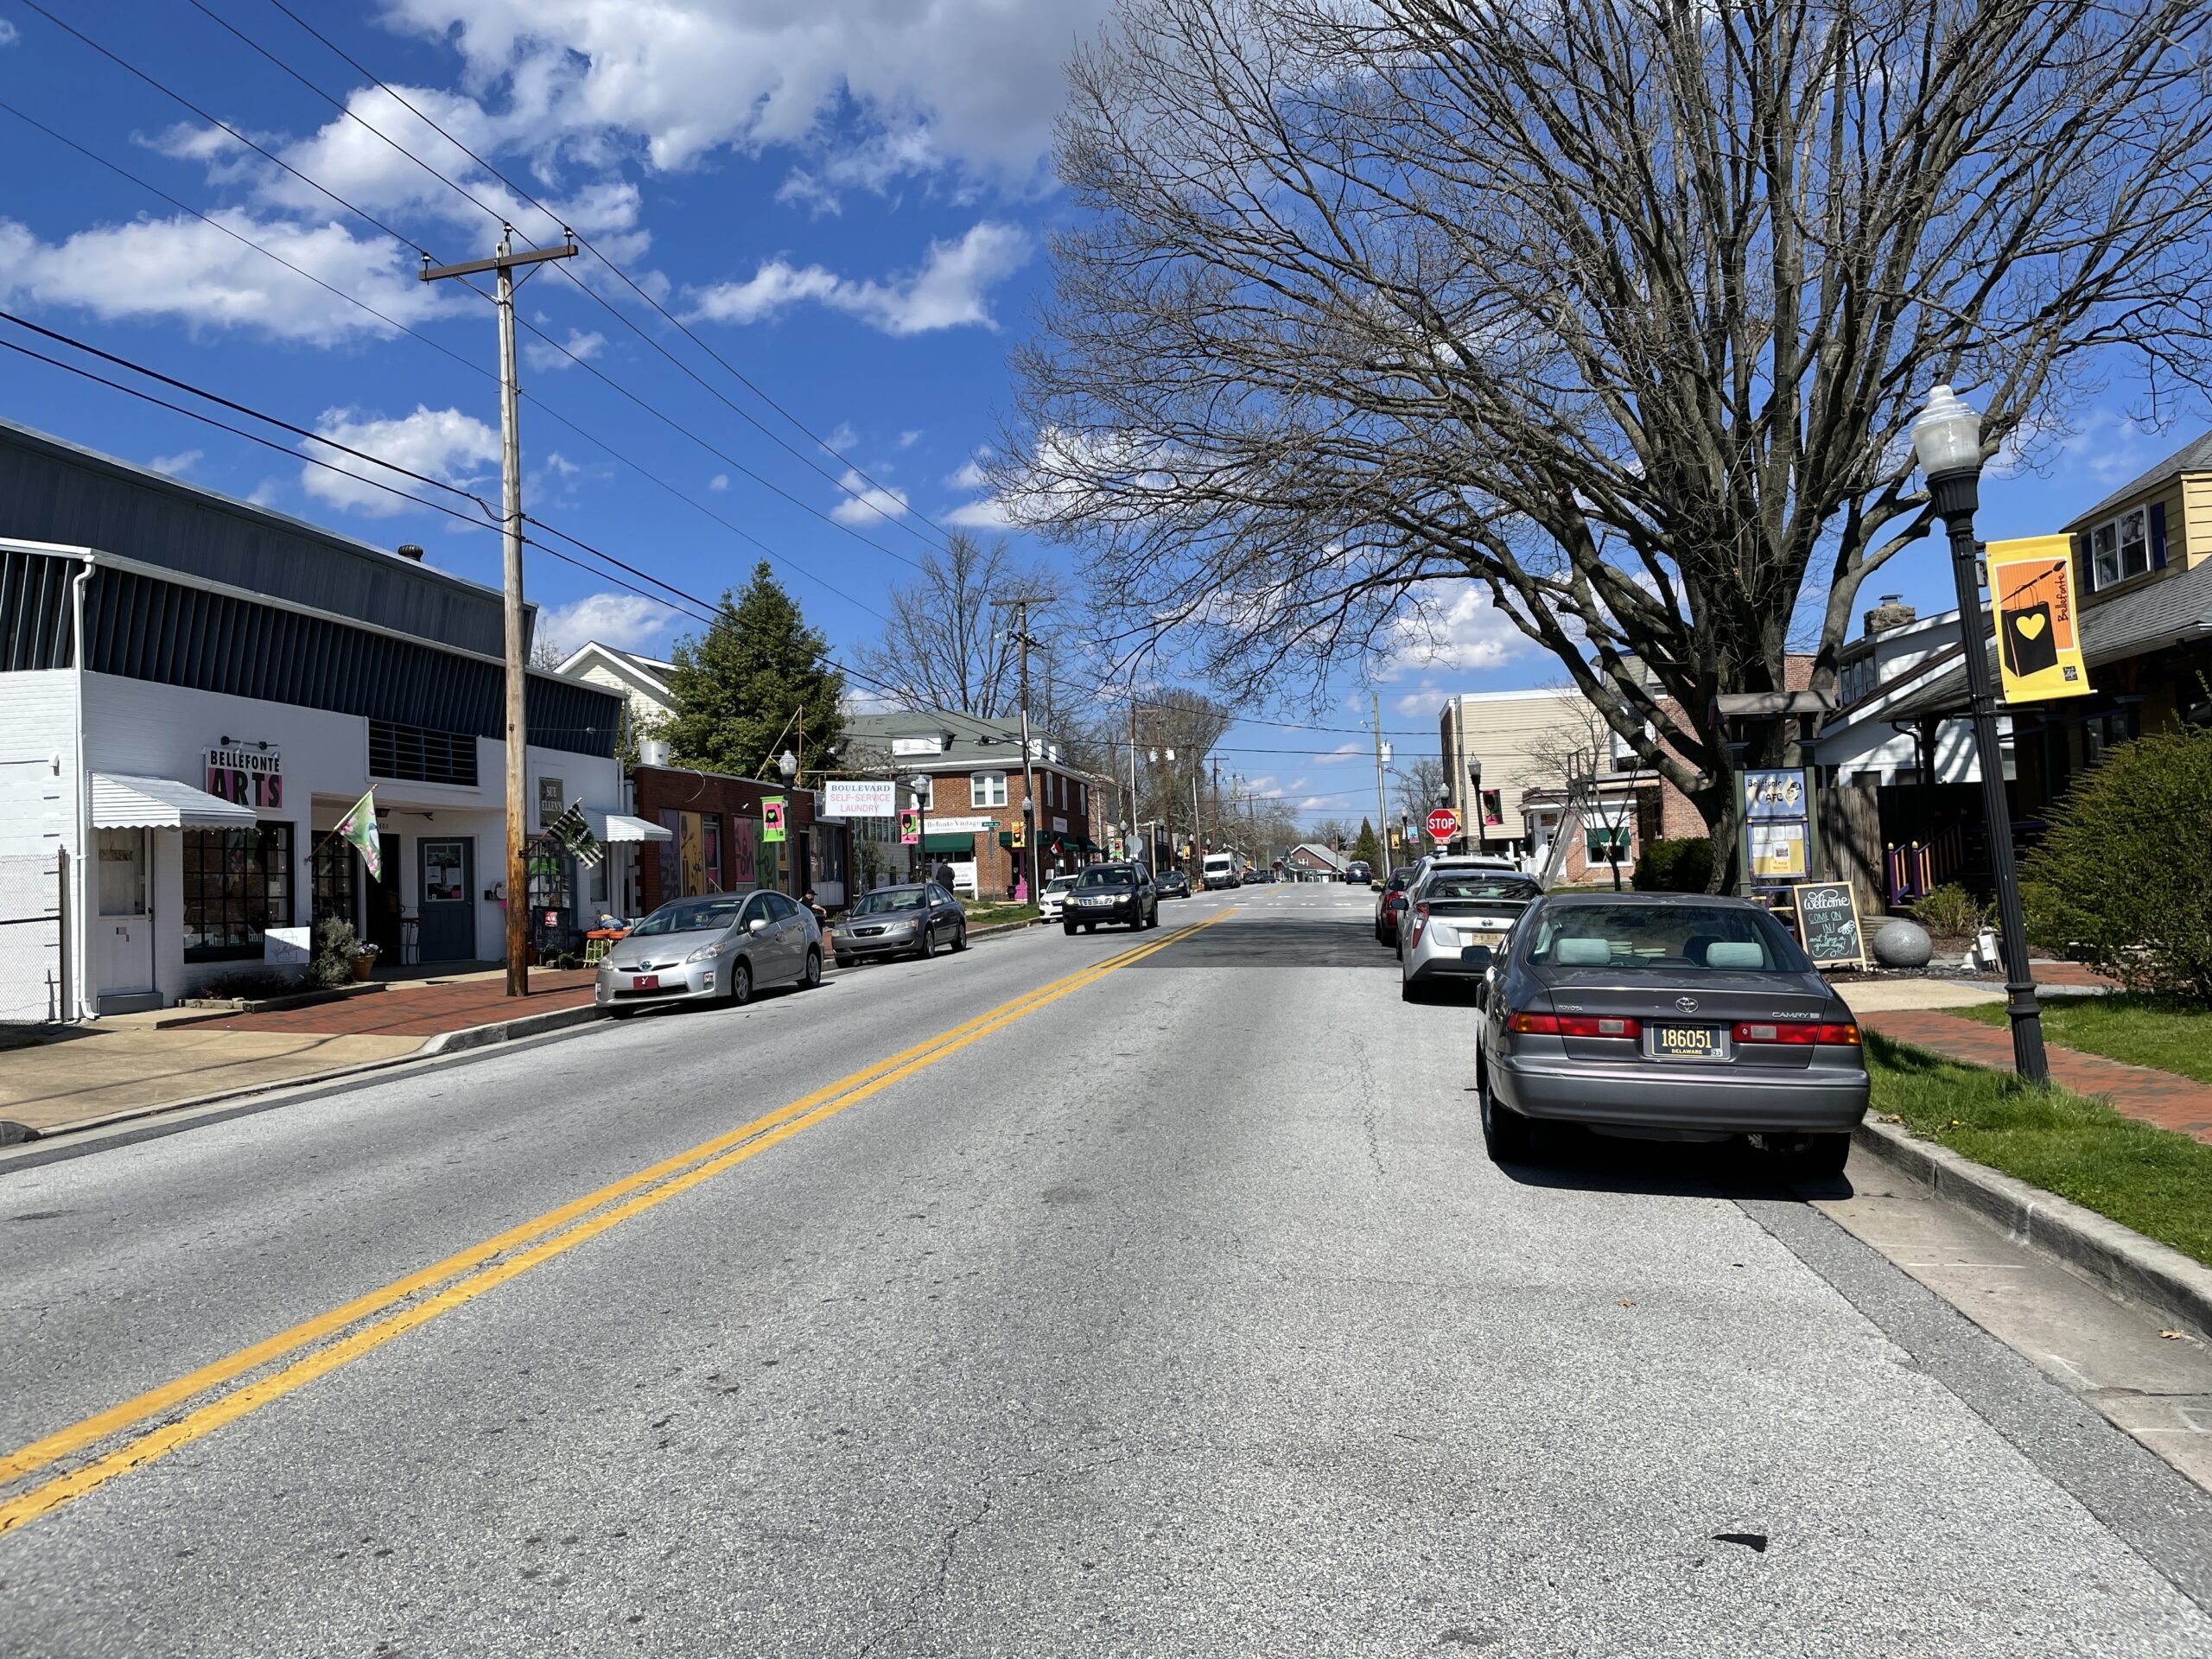 Brandywine Boulevard in Bellefonte, DE, showing a quiet street with parked cars, local shops, and trees lining the sidewalk under a clear blue sky."